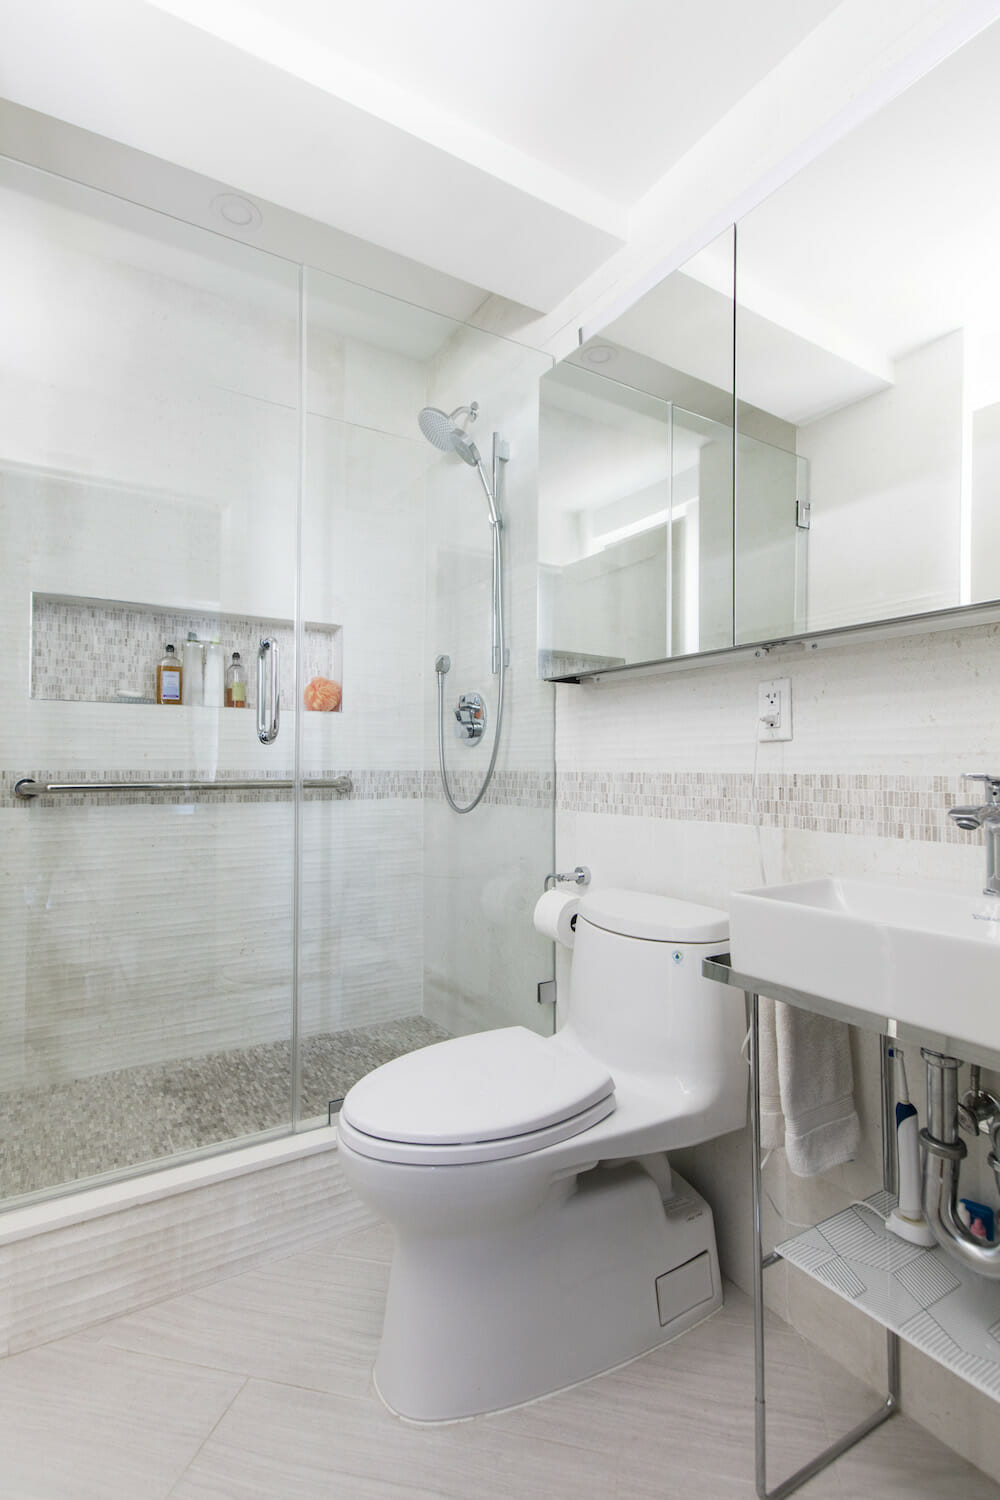 A remodeled bathroom with step-in shower, glass door and shower niche storage